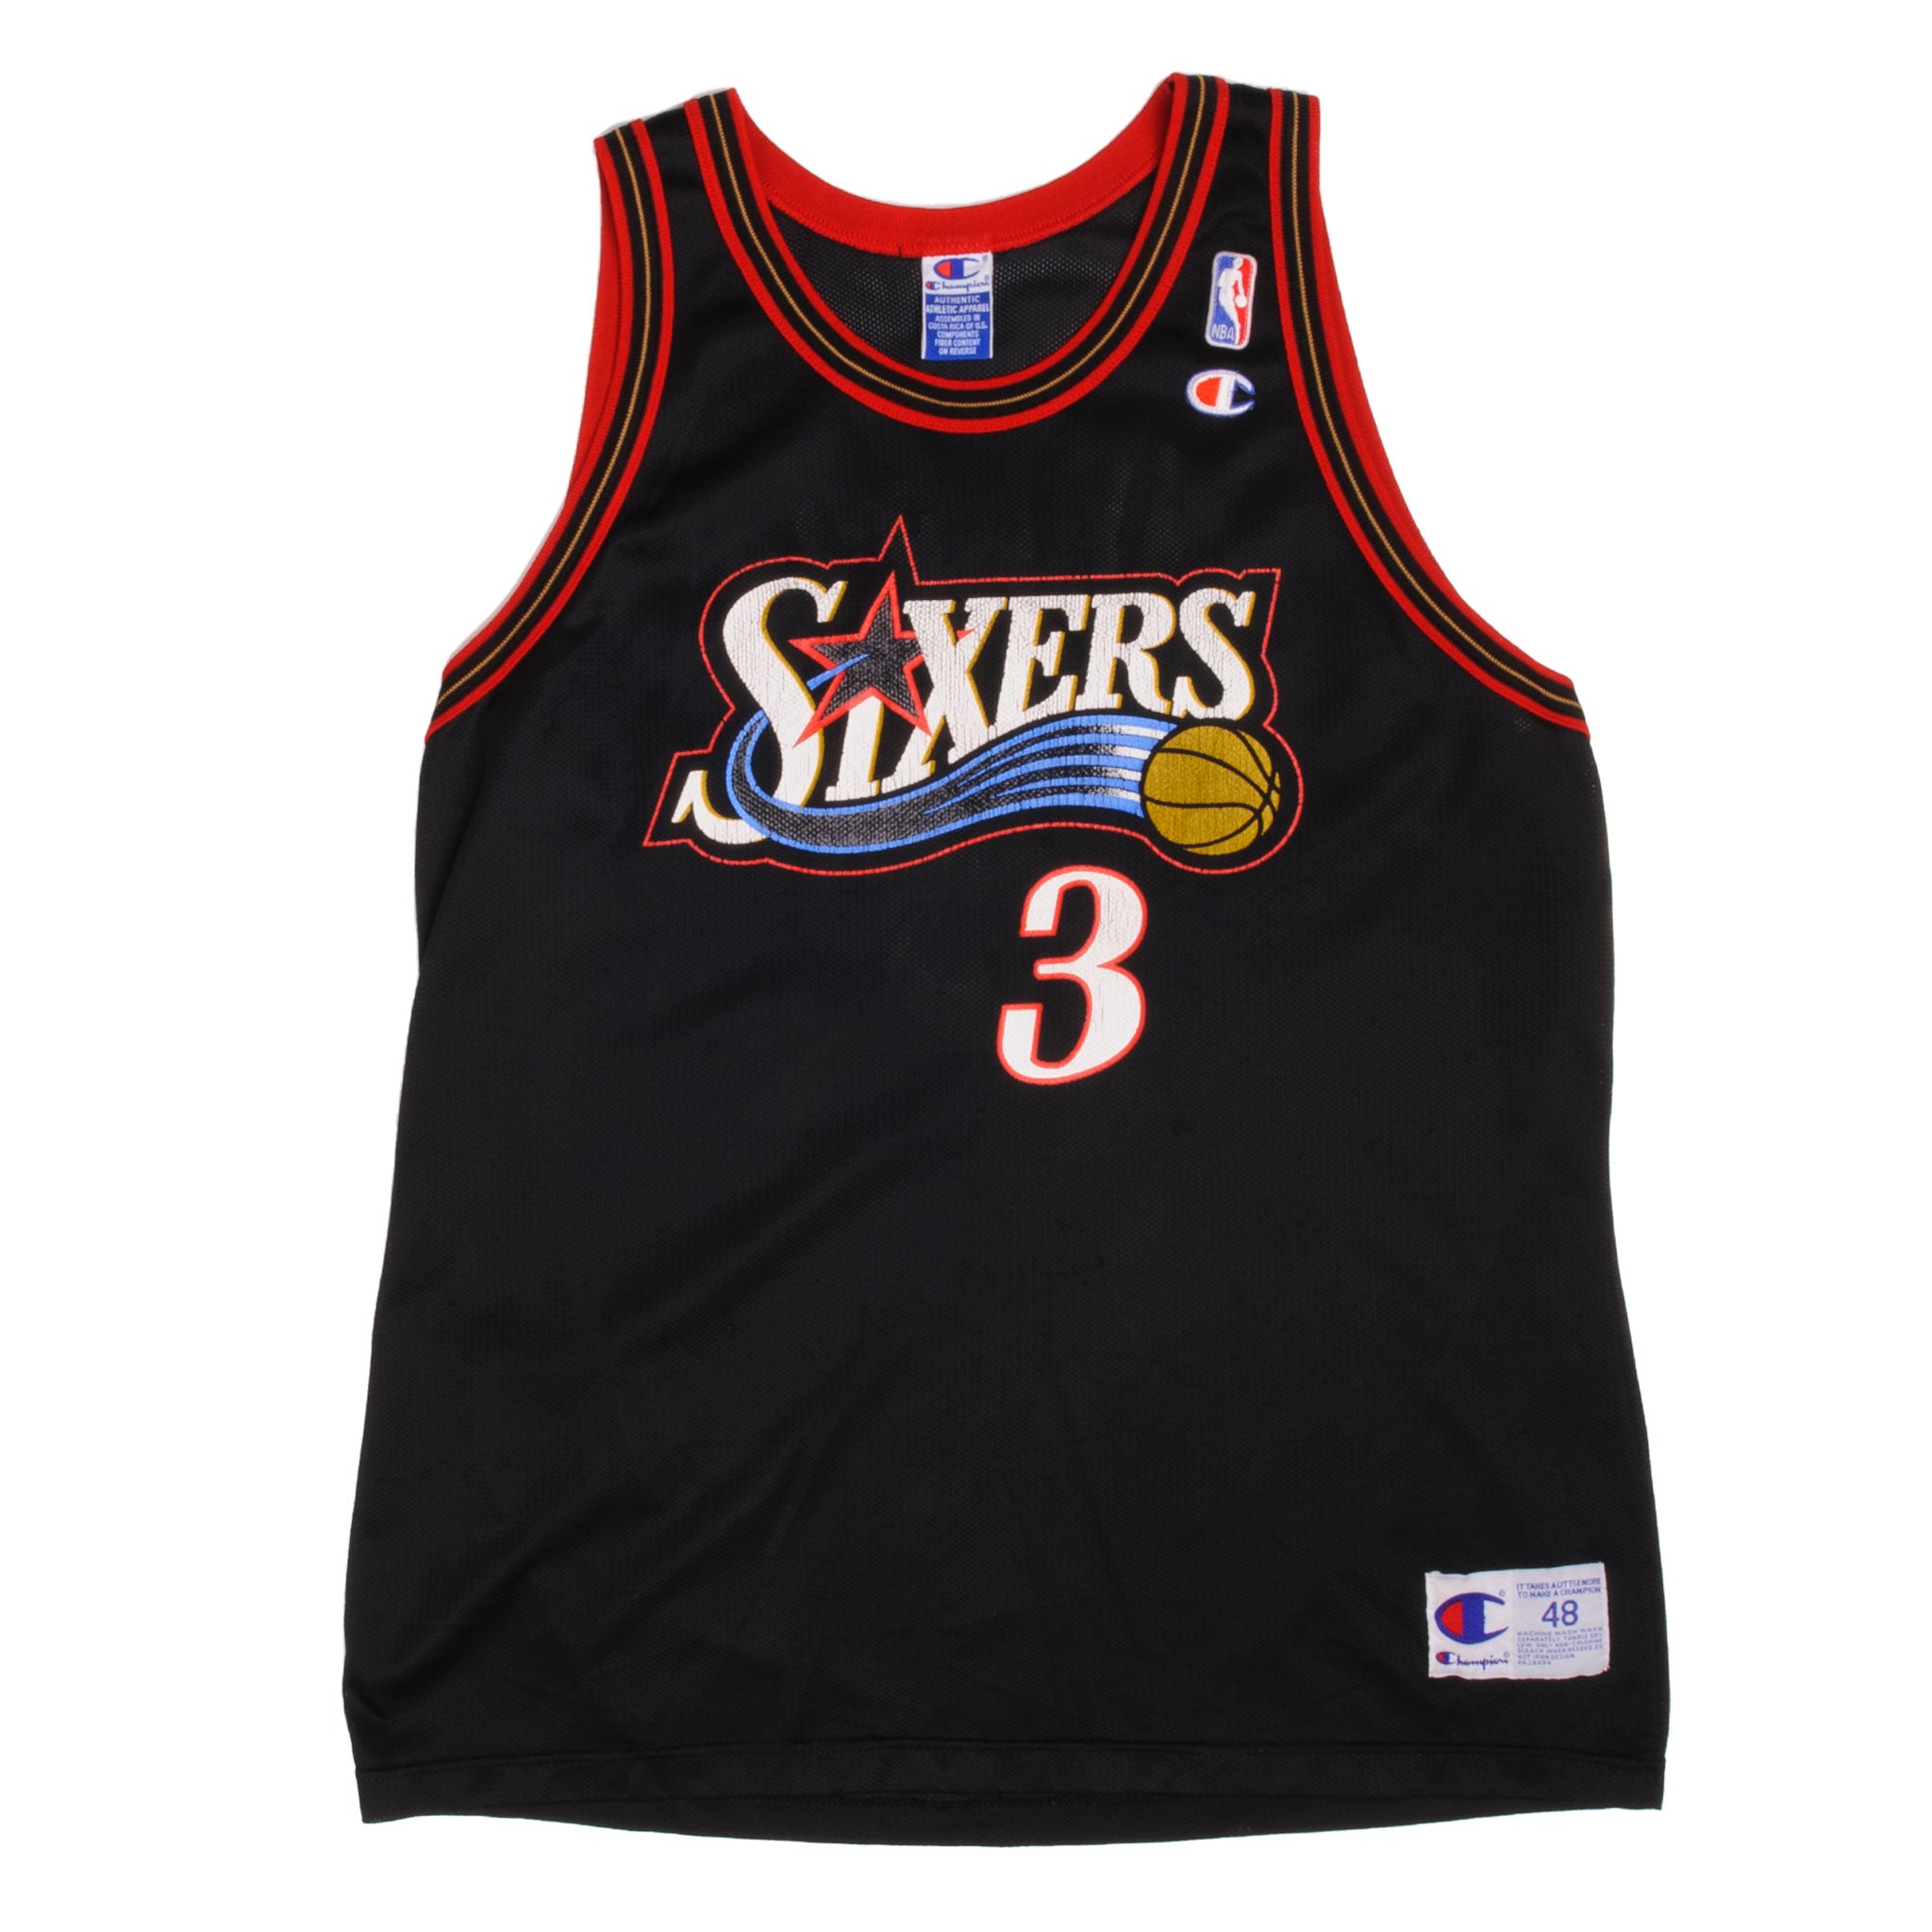 Vintage Allen Iverson Jersey Champion Sixers Shirt Basketball 